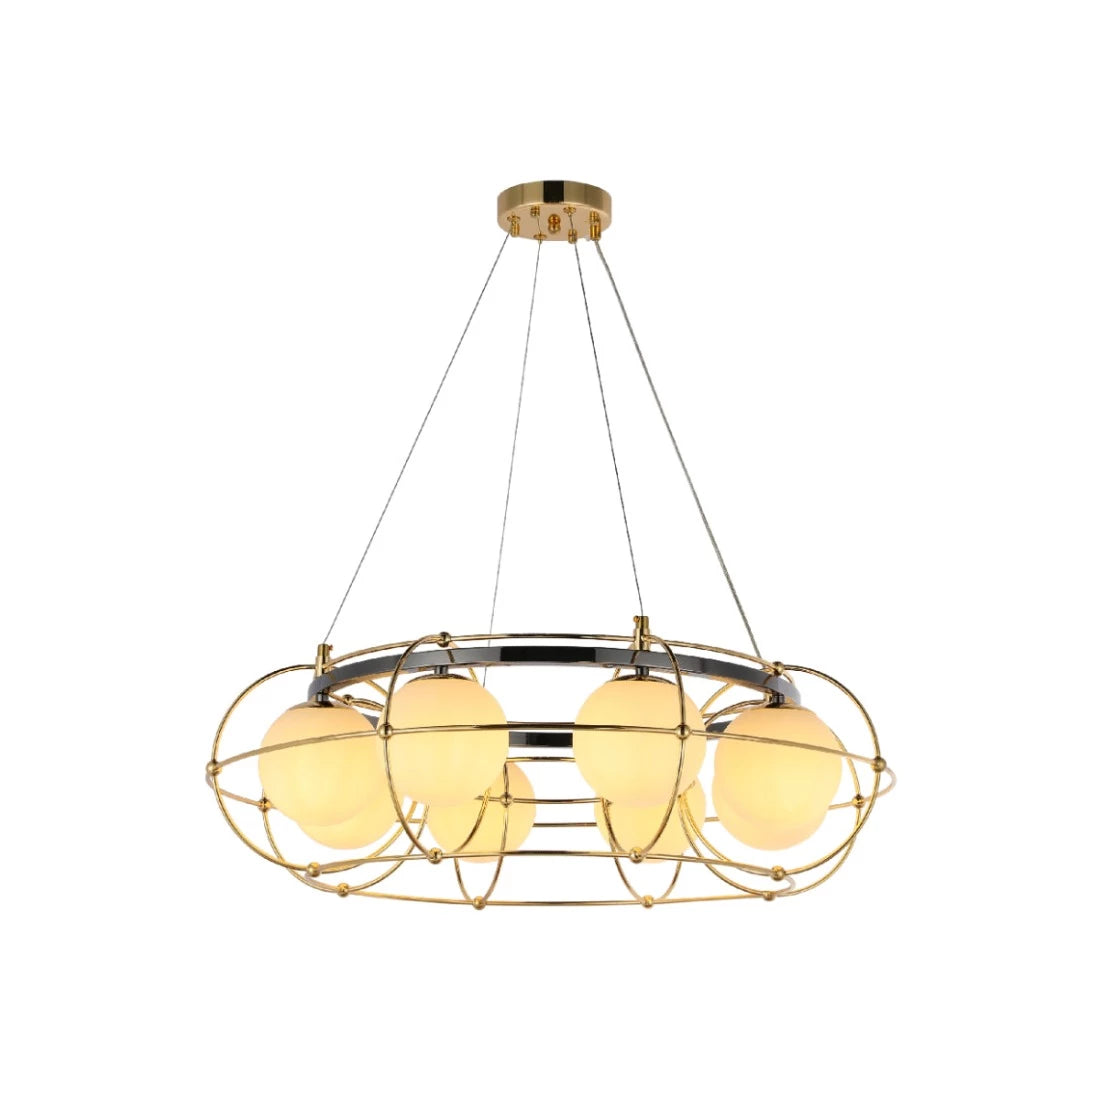 Main image of Vintage-Modern Orb Chandelier with Geometric Gold Detailing G9 150-19034